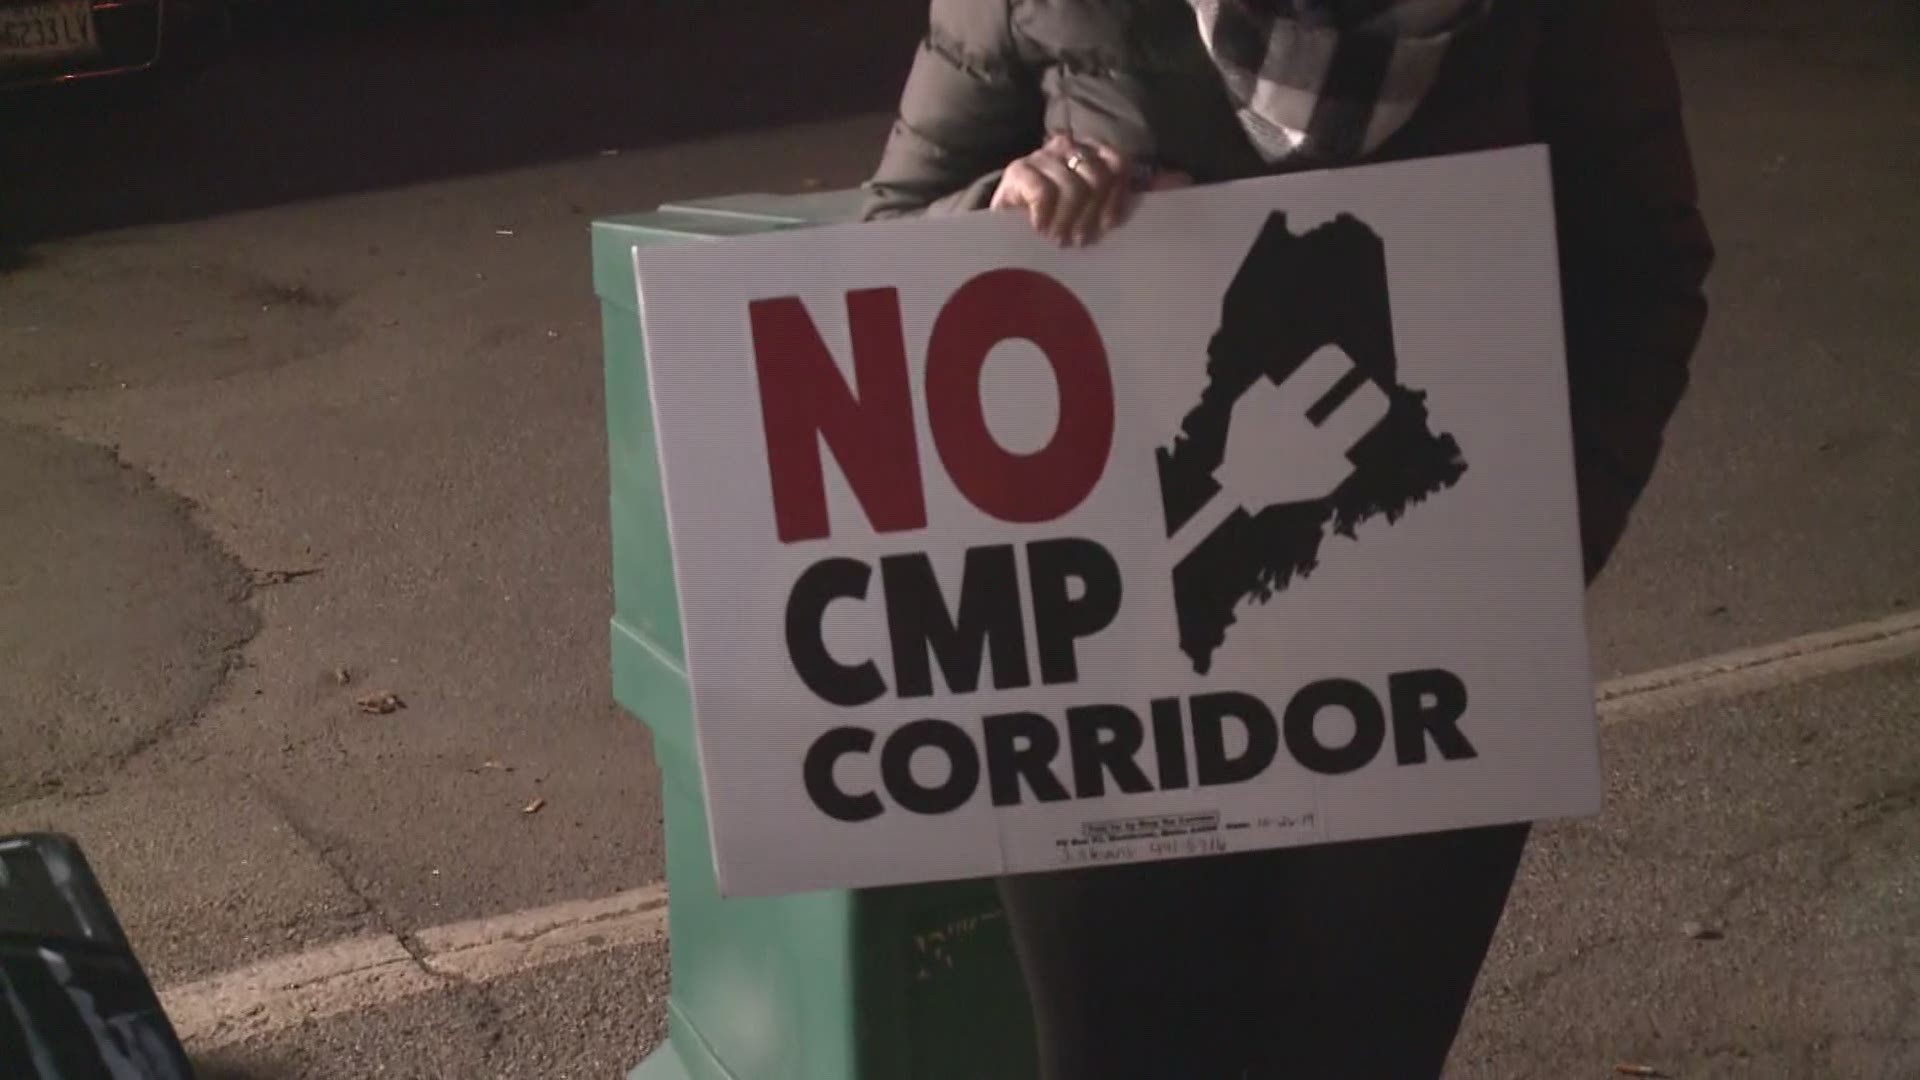 Volunteers with "No CMP Corridor" were outside Bath Iron Works' collecting signatures on a petition against Central Maine Power's Transmission line project.